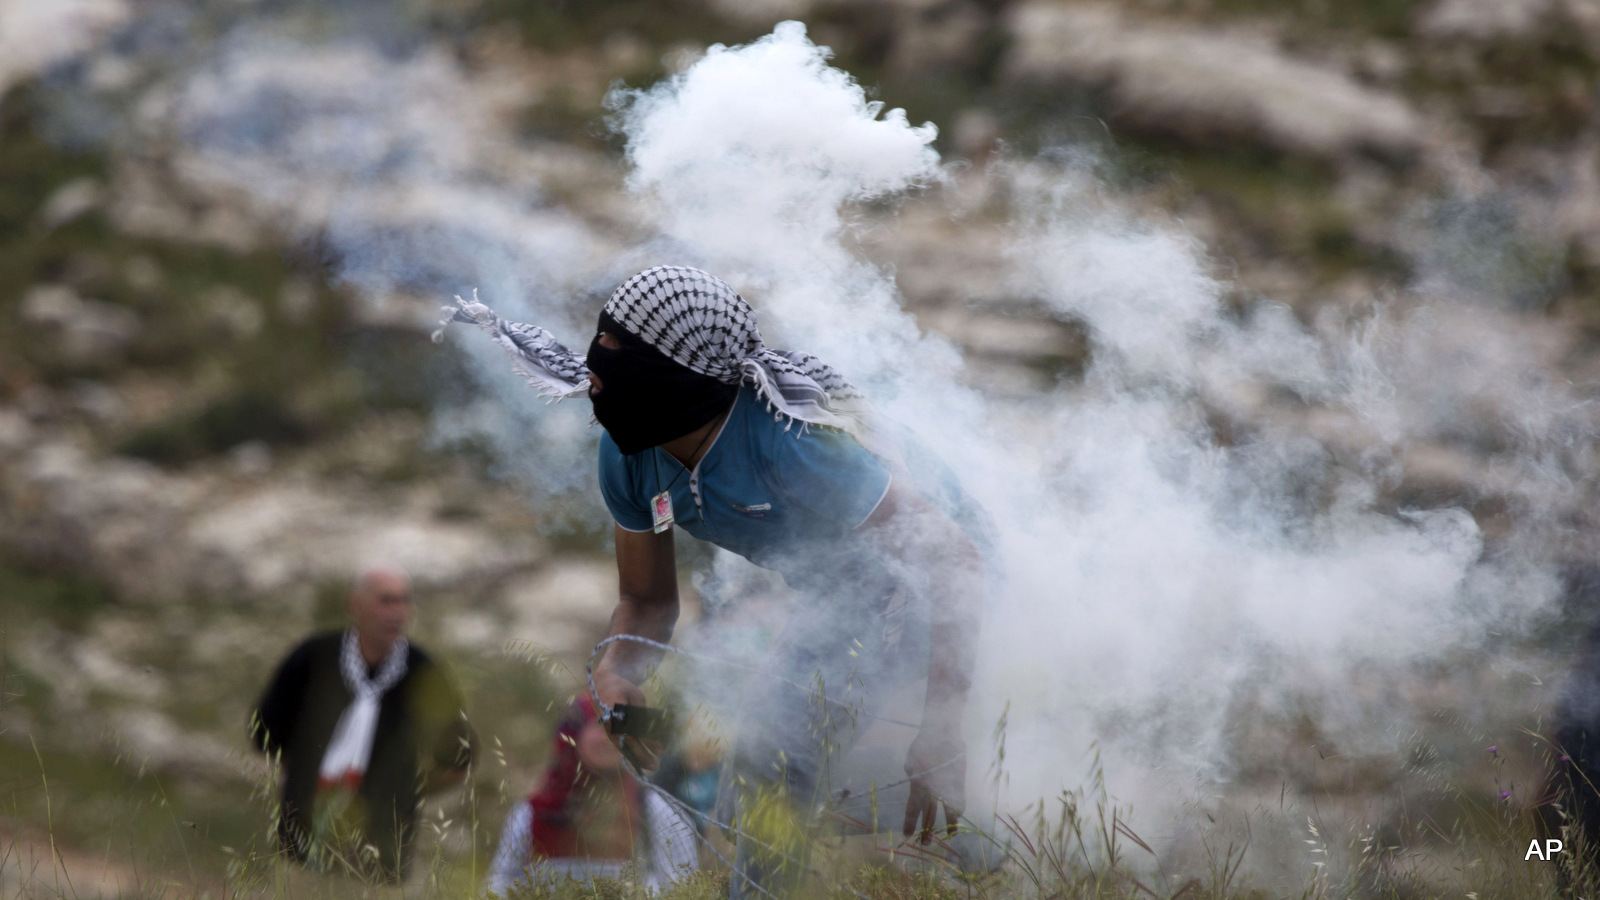 A Palestinian throws back a tear gas canister toward Israeli troops during a protest marking Land Day, in the West Bank village of Nabi Saleh near Ramallah.